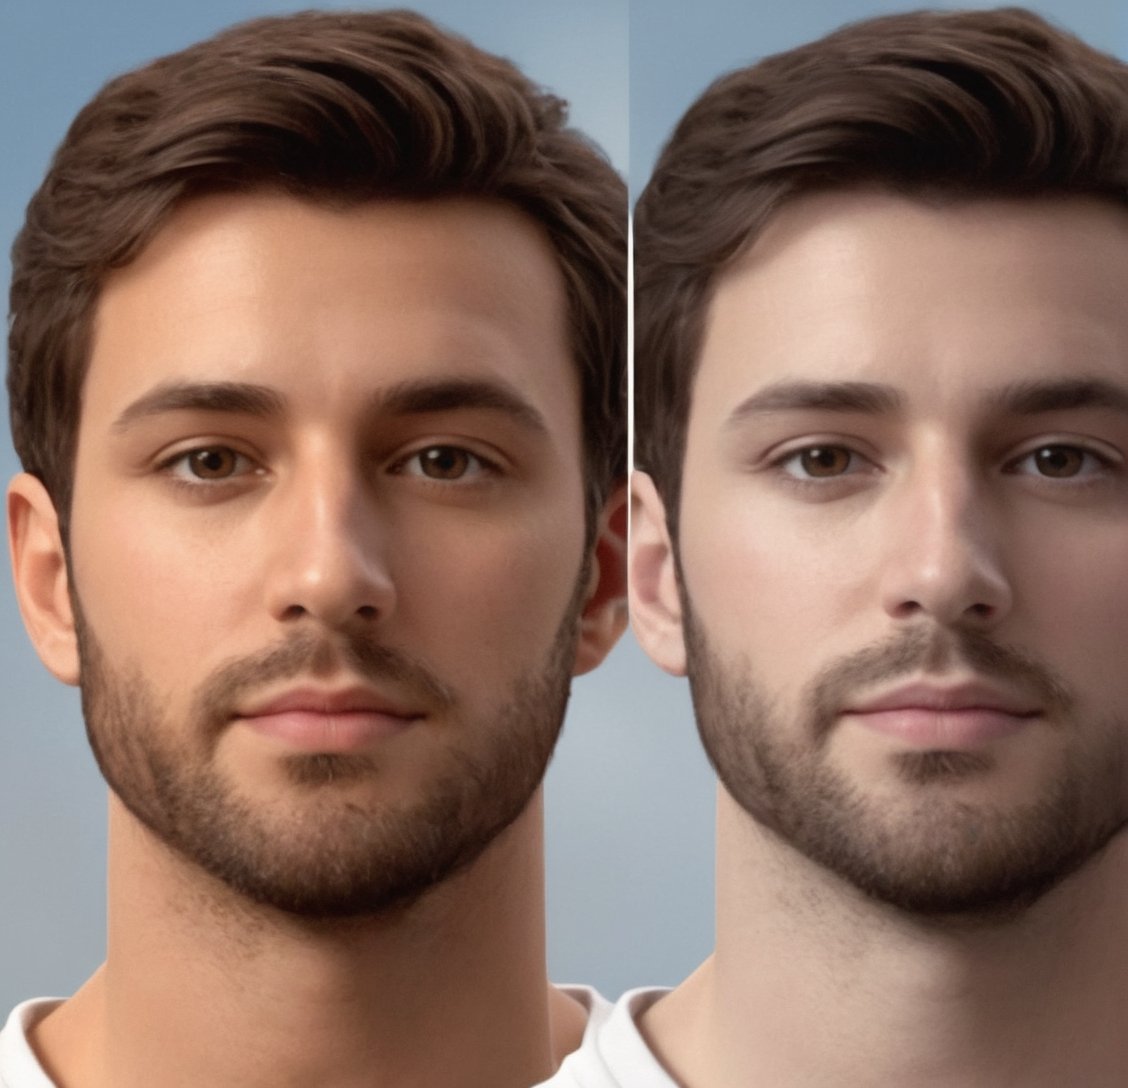 Generate a 3D man to use in AI of a Spanish man with brown hair and eyes and white skin, with slight circles under his eyes based on these links, face the same as the one in the links:
https://www.facebook.com/photo/?fbid=7222619341193542&set=a.7222620204526789, https://www.facebook.com/photo/?fbid=7222619391193537&set=a.7222620204526789, https://www.facebook.com/photo/?fbid=7222619424526867&set=a.7222620204526789, https://www.facebook.com/photo/?fbid=7222619274526882&set=a.7222620204526789, https://www.facebook.com/photo/?fbid=7222617957860347&set=a.7222620204526789, https://www.facebook.com/photo/?fbid=7222619187860224&set=a.7222620204526789, https://www.facebook.com/photo/?fbid=7222618941193582&set=a.7222620204526789, https://www.facebook.com/photo/?fbid=7222619281193548&set=a.7222620204526789